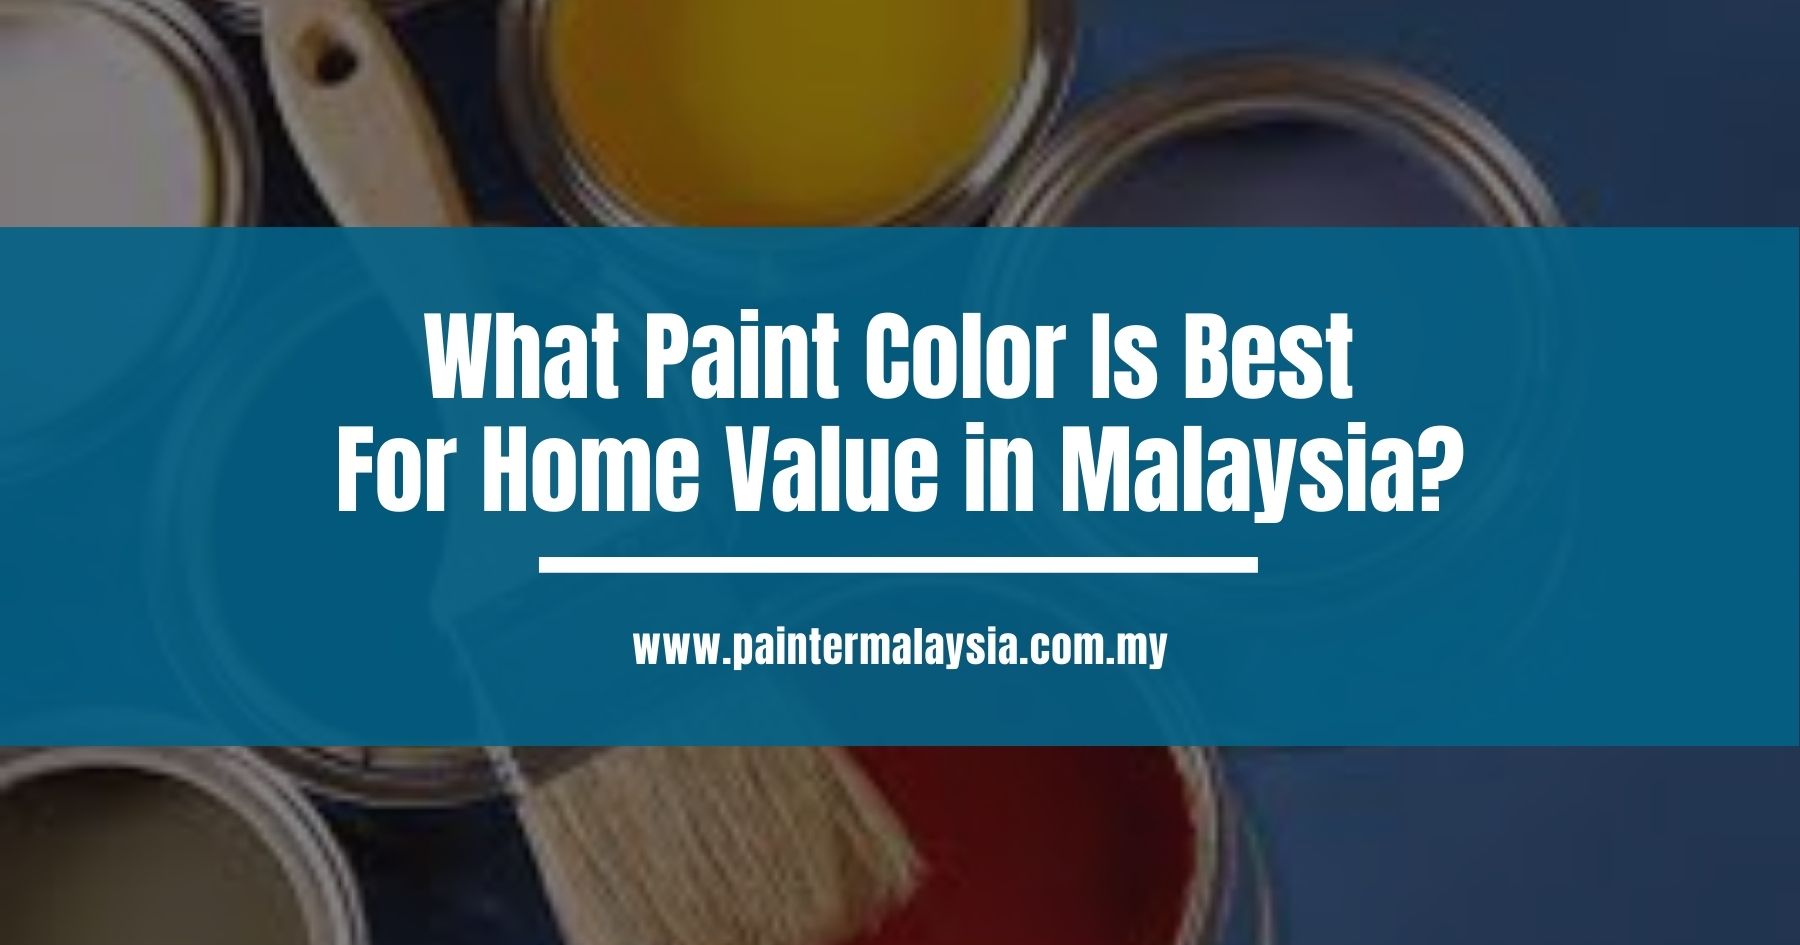 What Paint Color Is Best For Home Value in Malaysia?